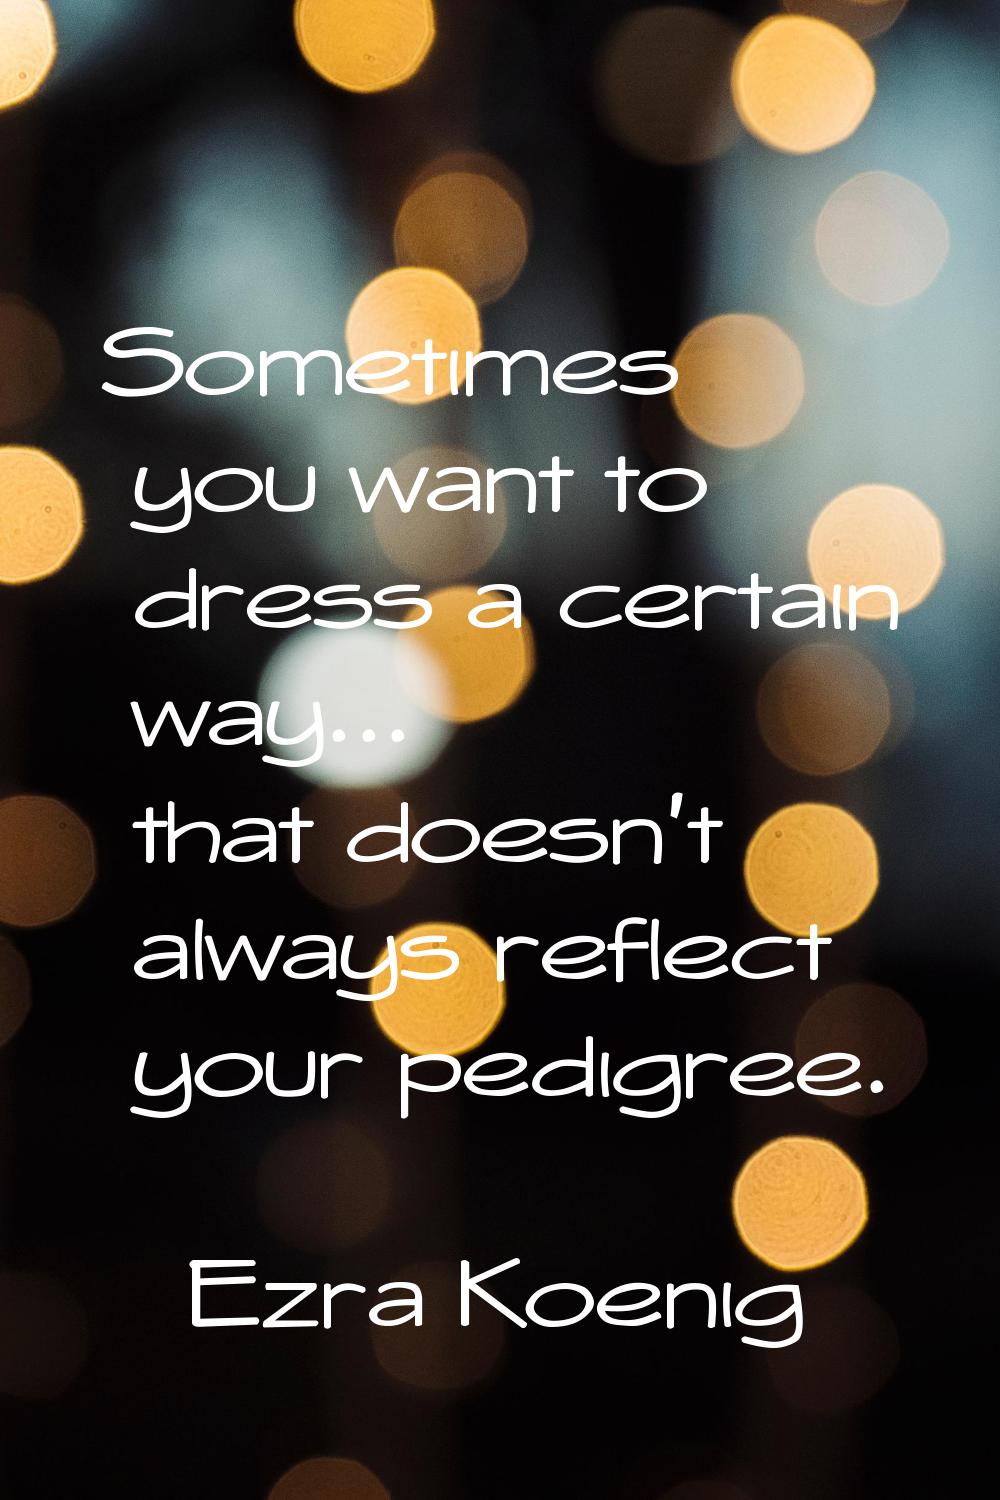 Sometimes you want to dress a certain way... that doesn't always reflect your pedigree.